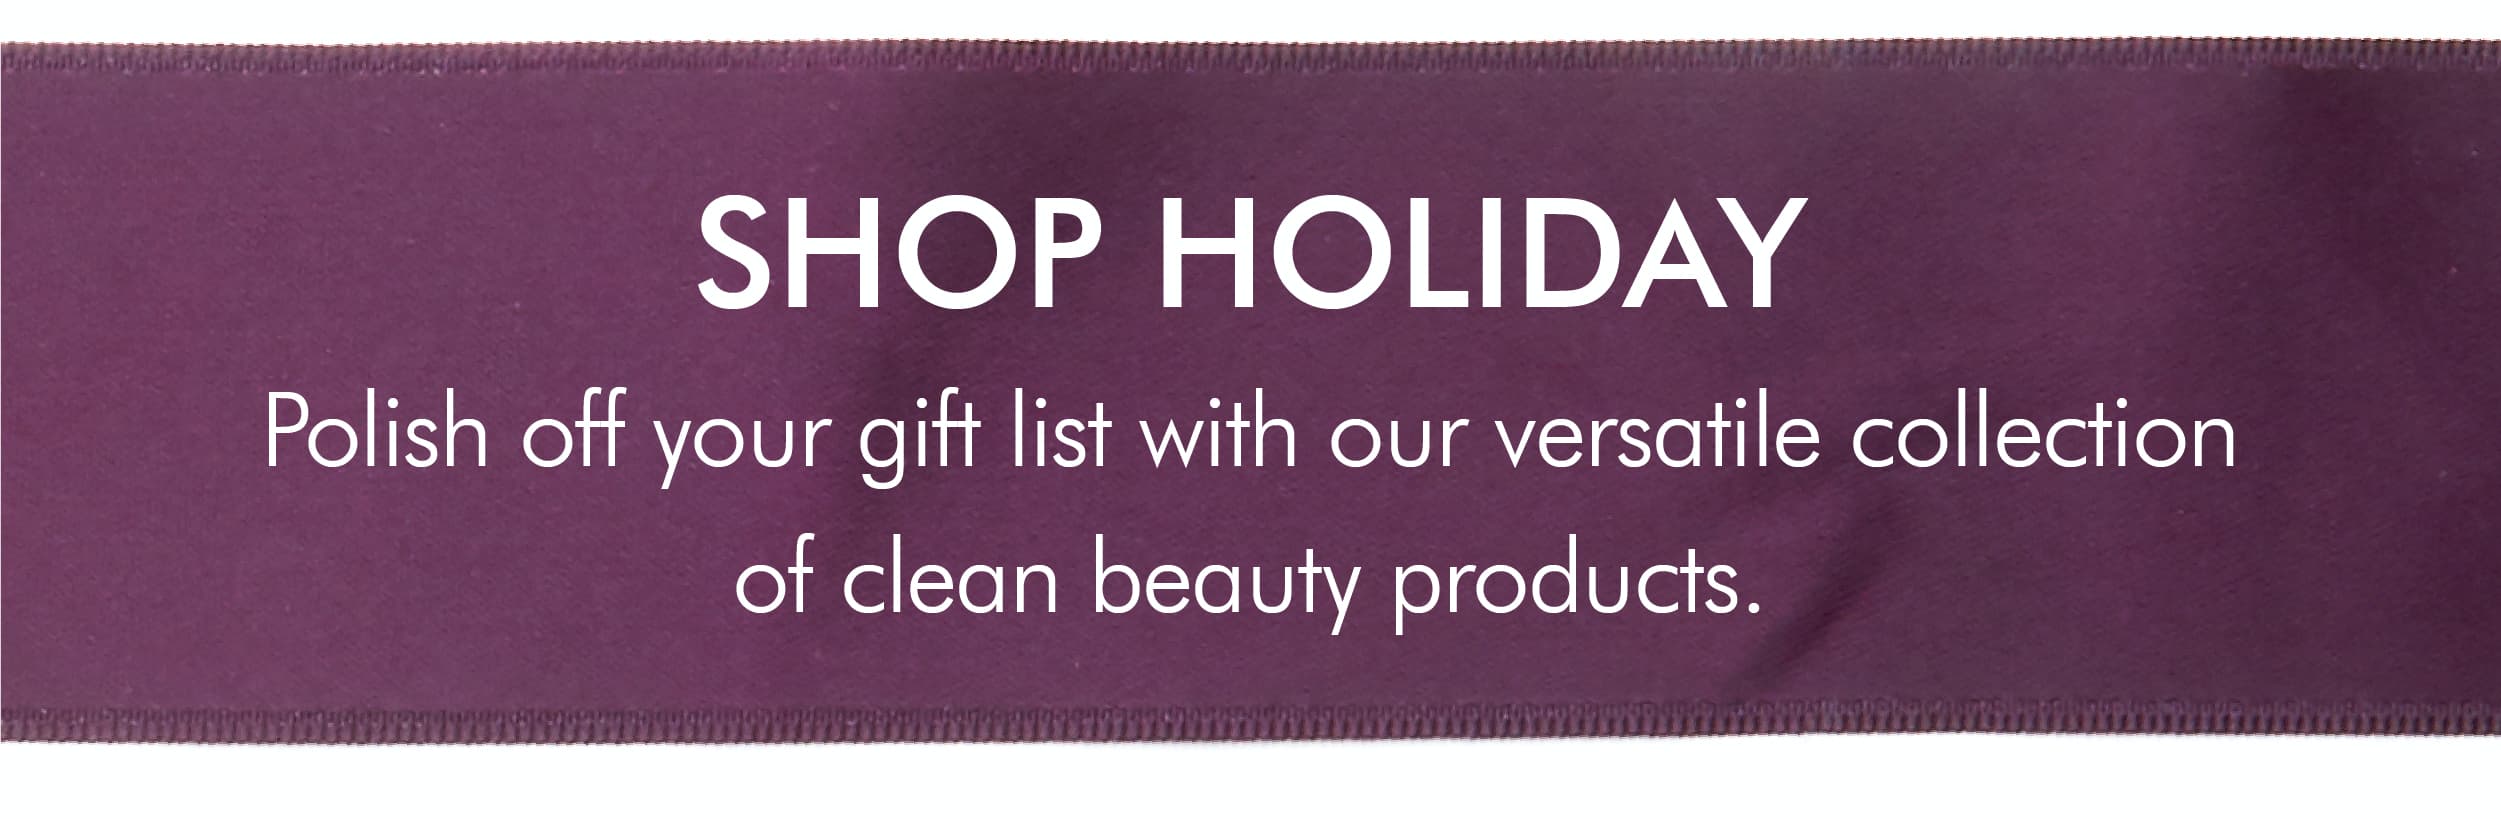 Polish Off Your Gift List With Our Versatile Collection Of Clean Beauty Products